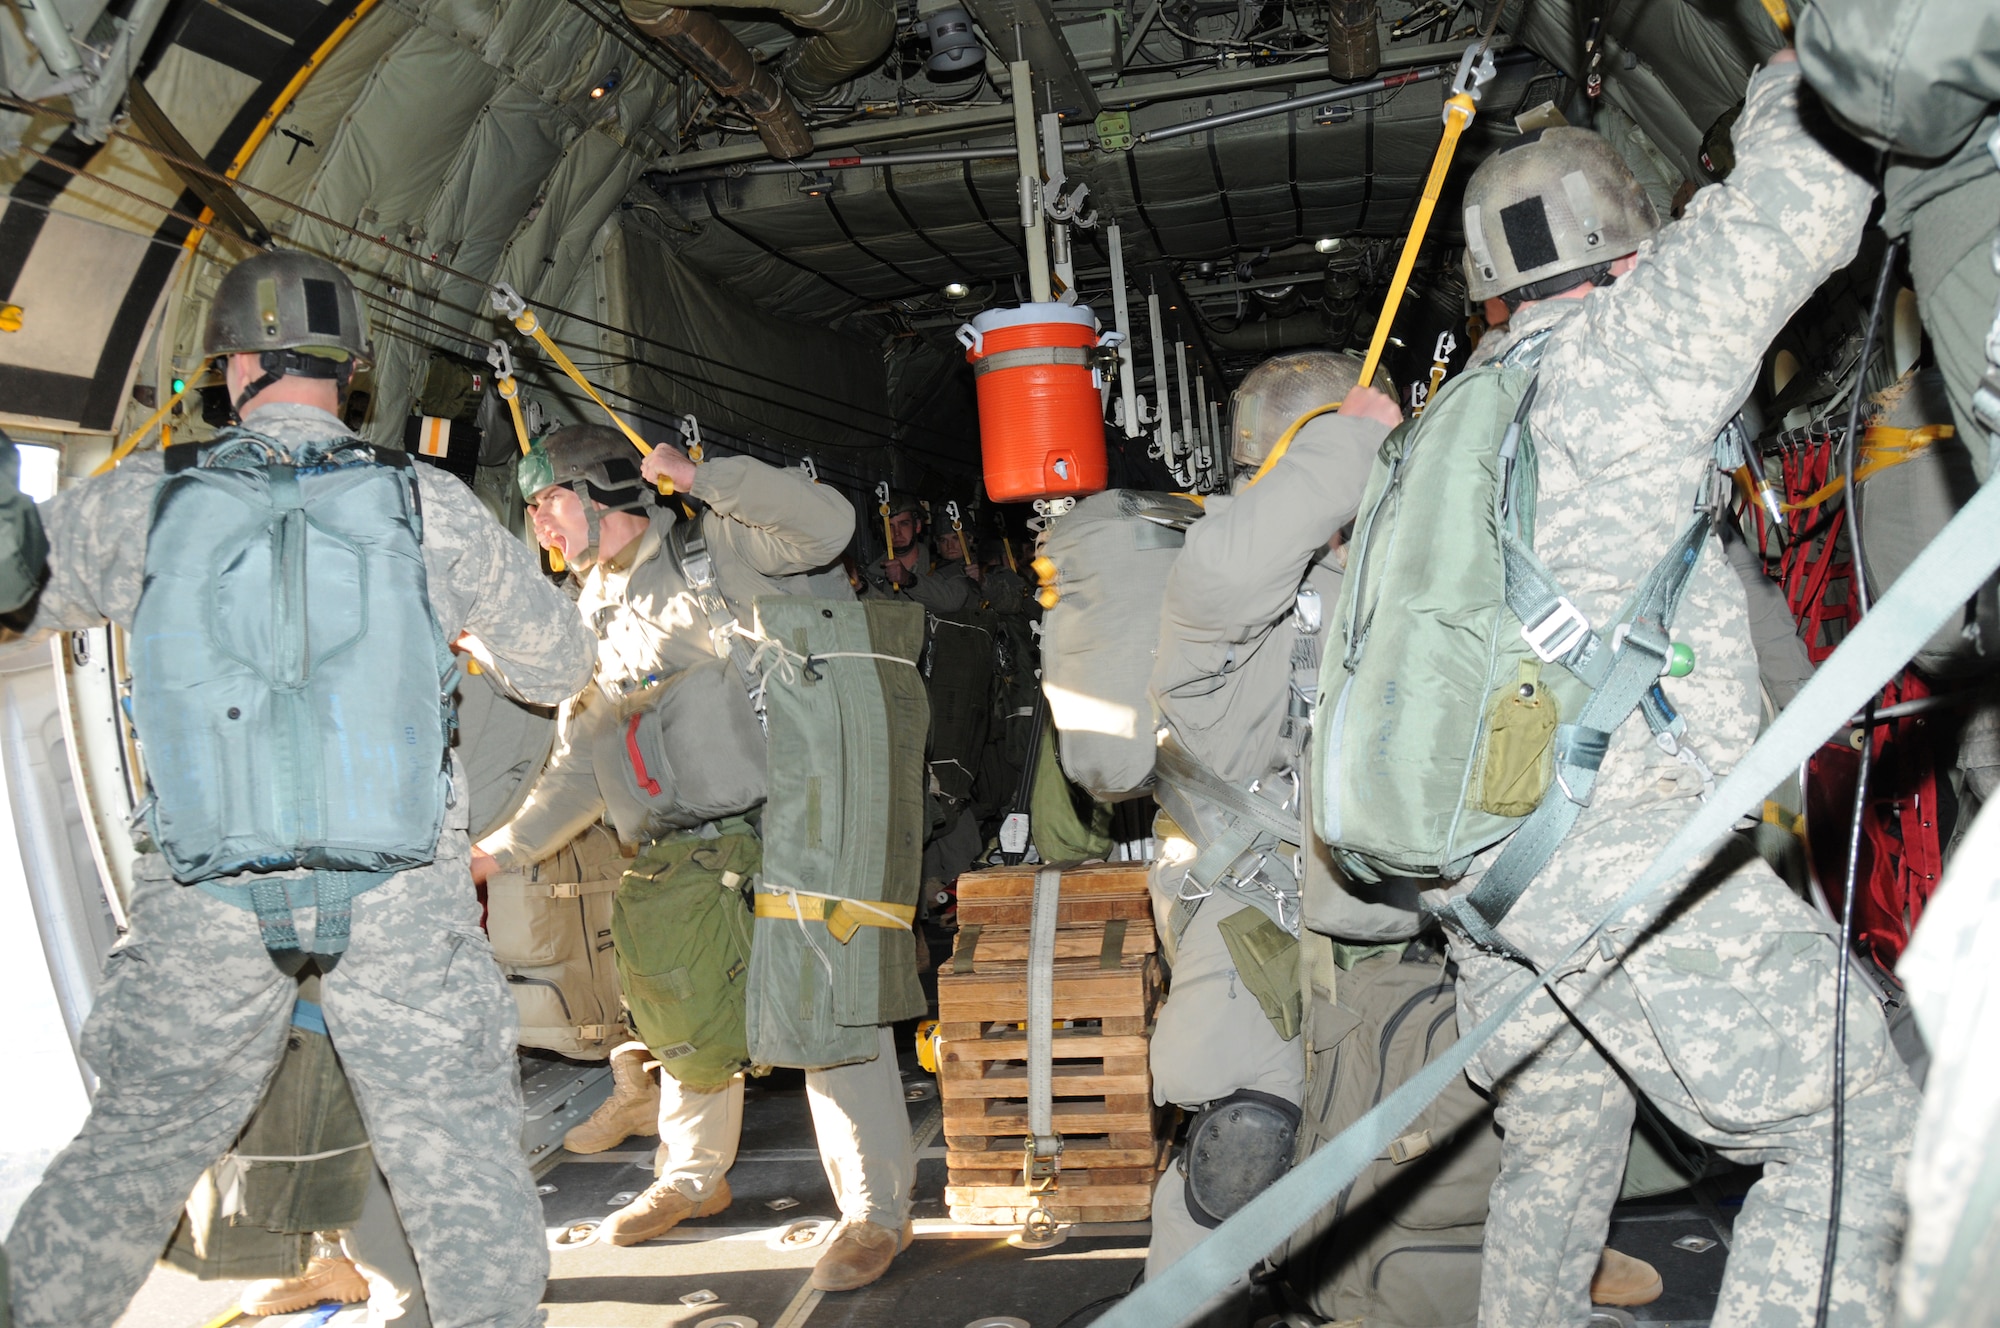 Army 3rd Ranger Battalion out of Fort Benning Georgia jump from the C-130 aircraft. This is the 107th Airlift Wing's first Army Ranger jump training operation. (AF Photo/Senior Master Sgt. Ray Lloyd)